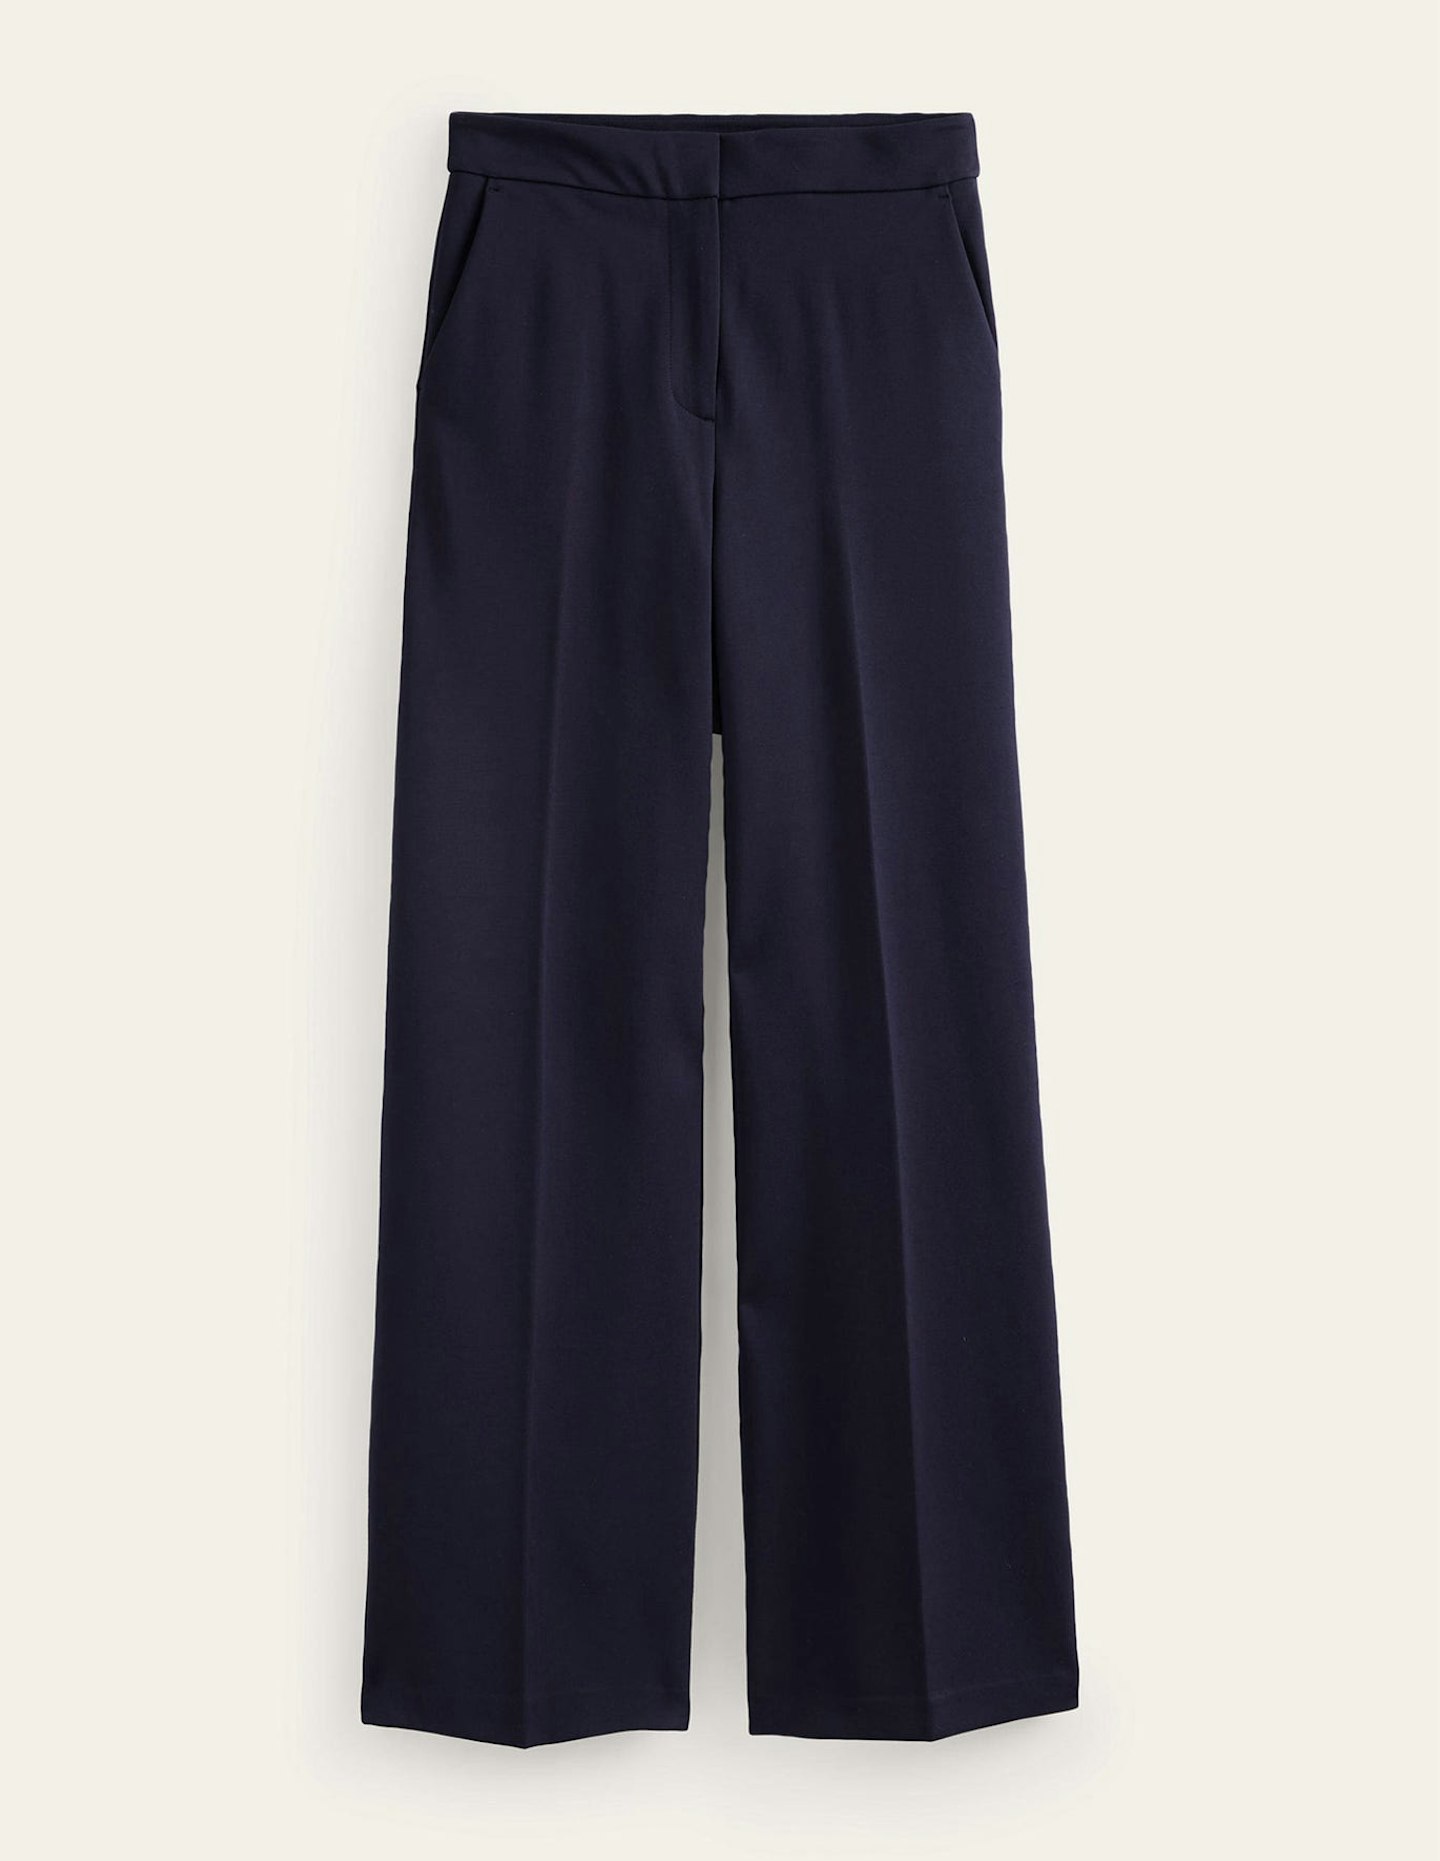 boden petite trousers